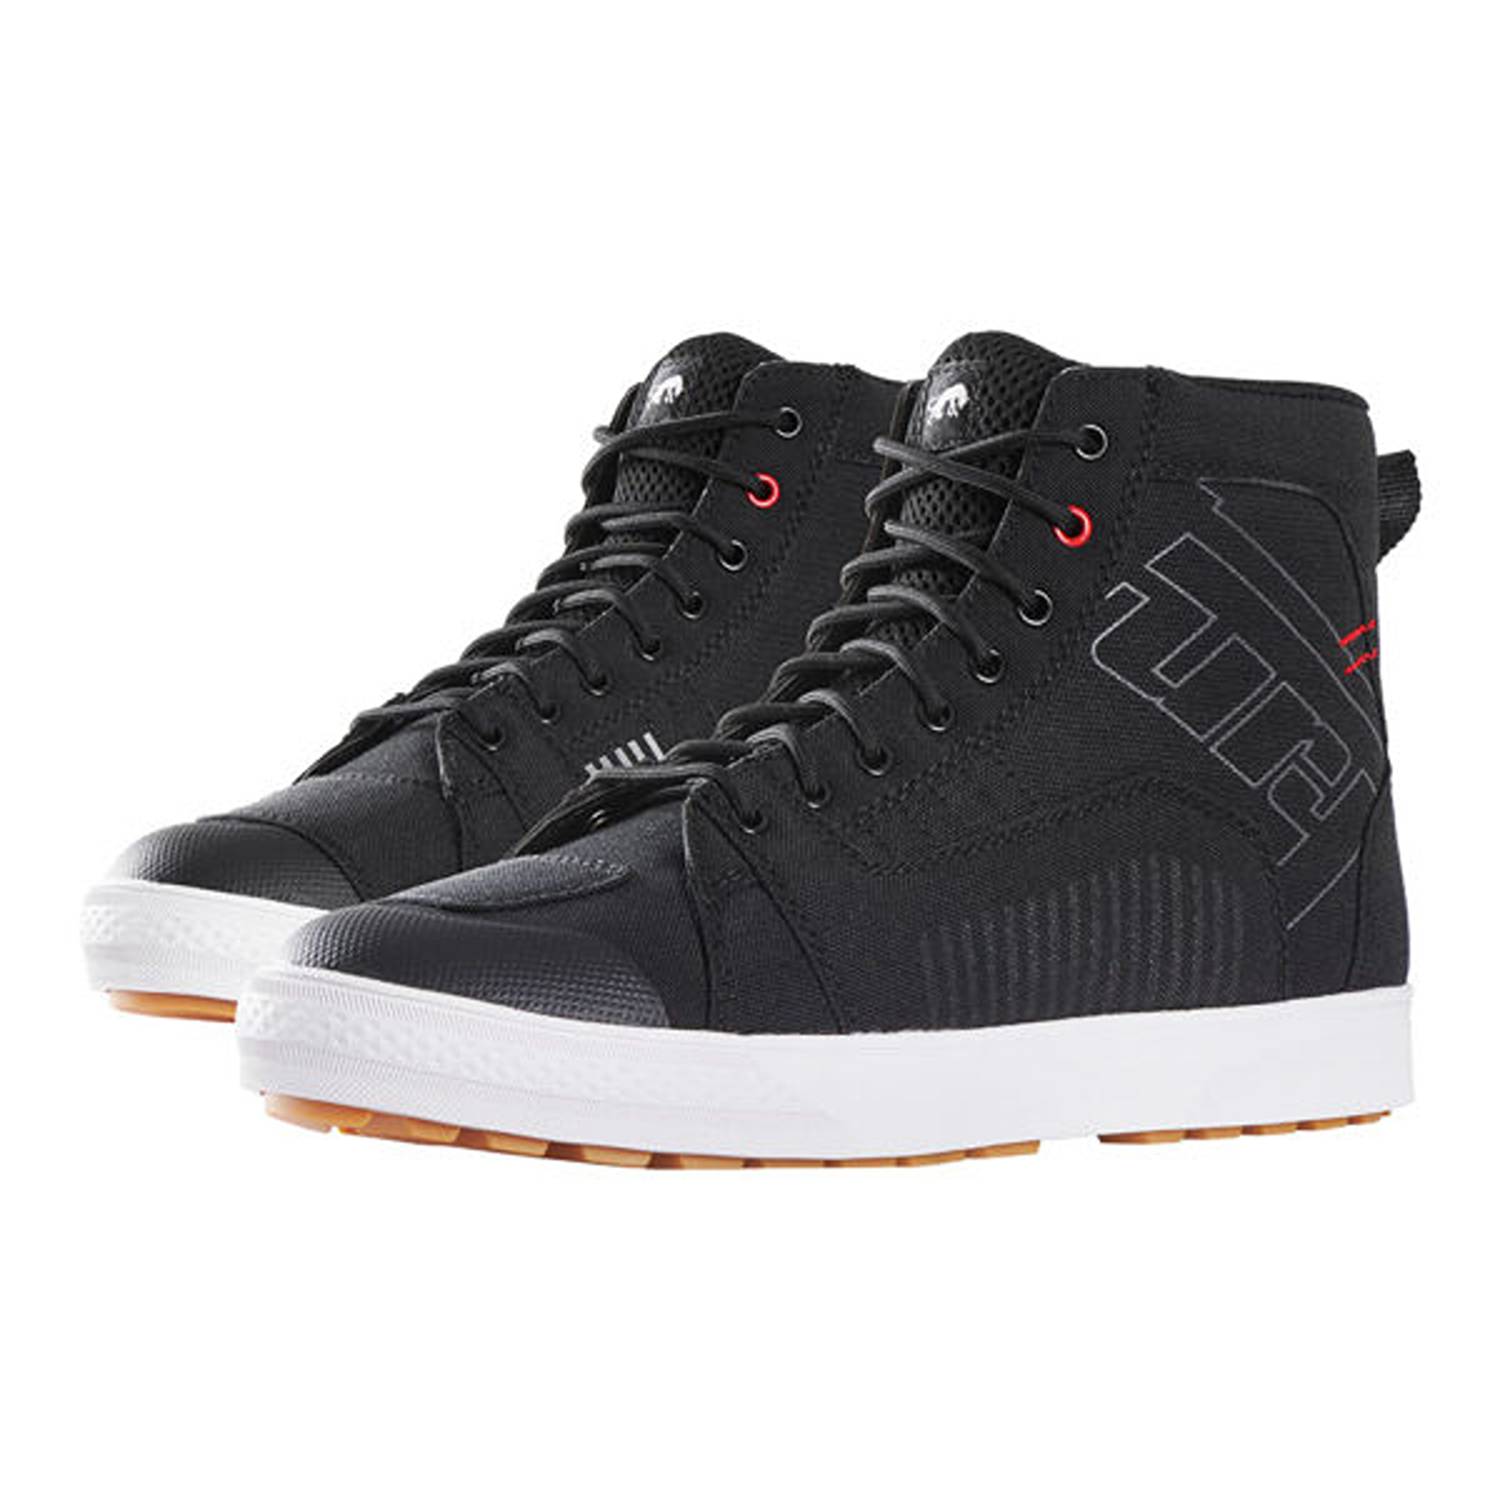 Image of EU Furygan Stockton Air D30 Shoes Black Red Taille 39